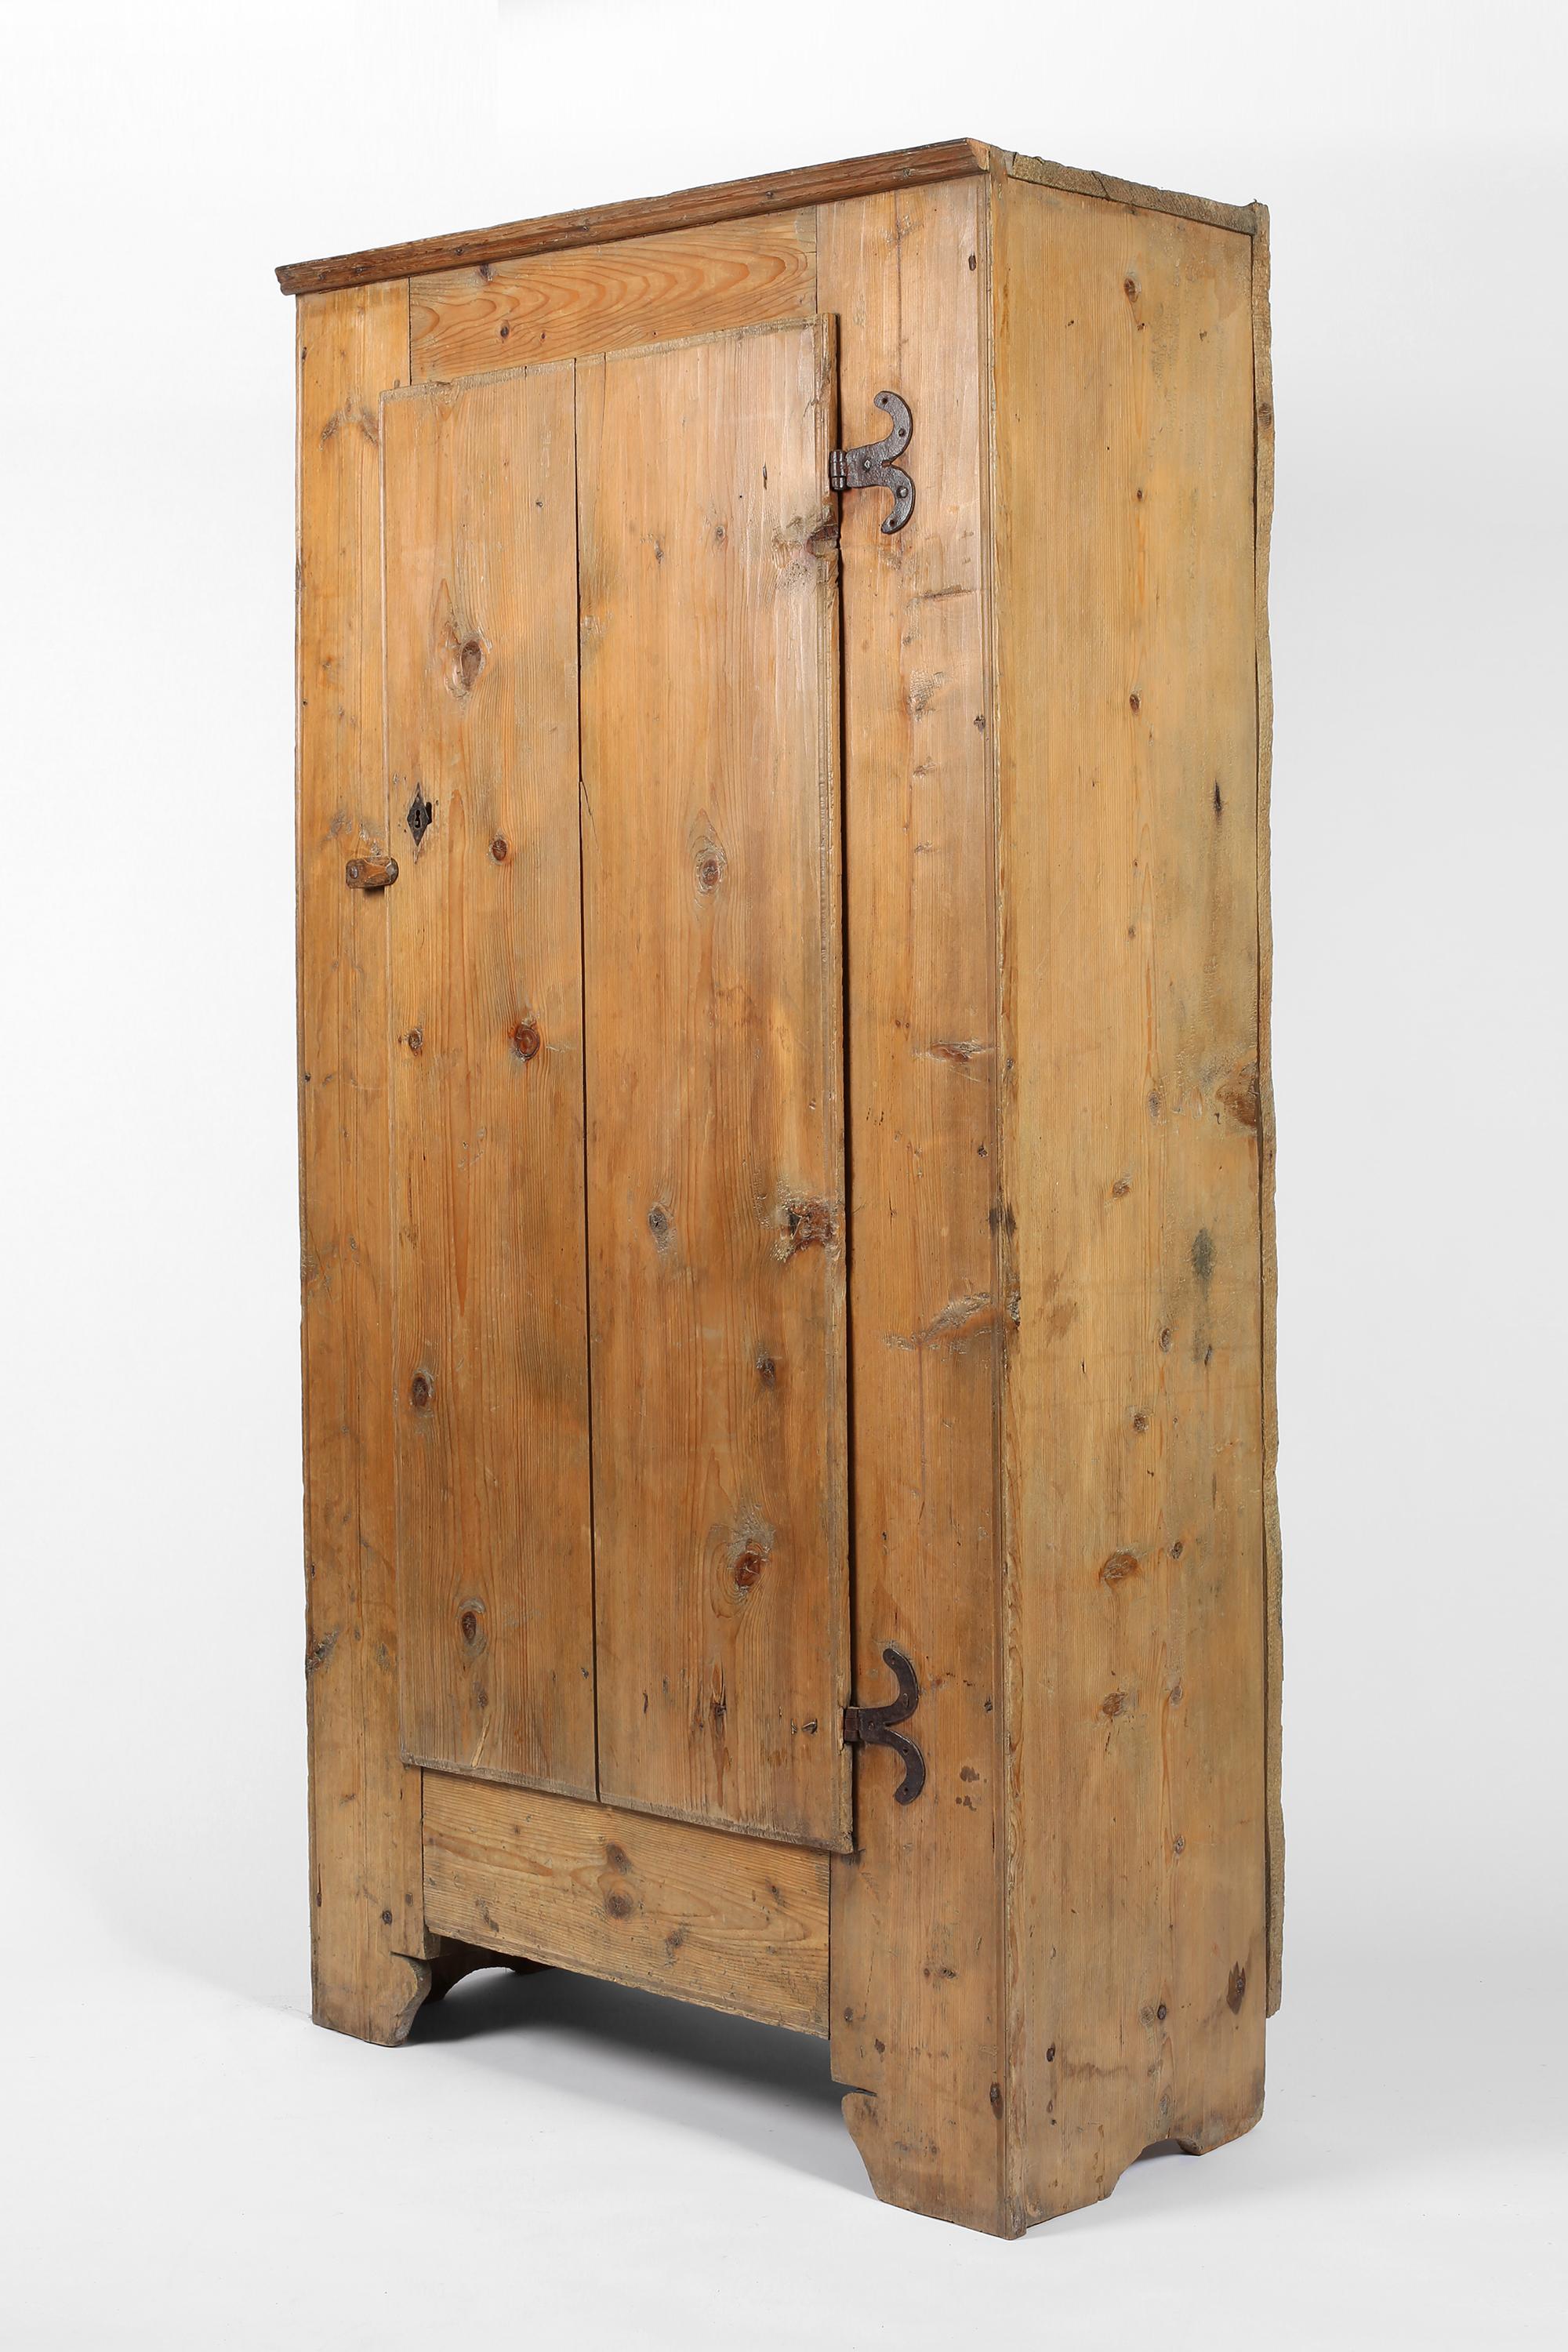 A large early 19th century Alpine cupboard constructed from thick planks of pine timber. Featuring its original decorative forged iron hardware and sitting on subtly shaped feet, the two plank door opens to reveal four shelves within. French, c.